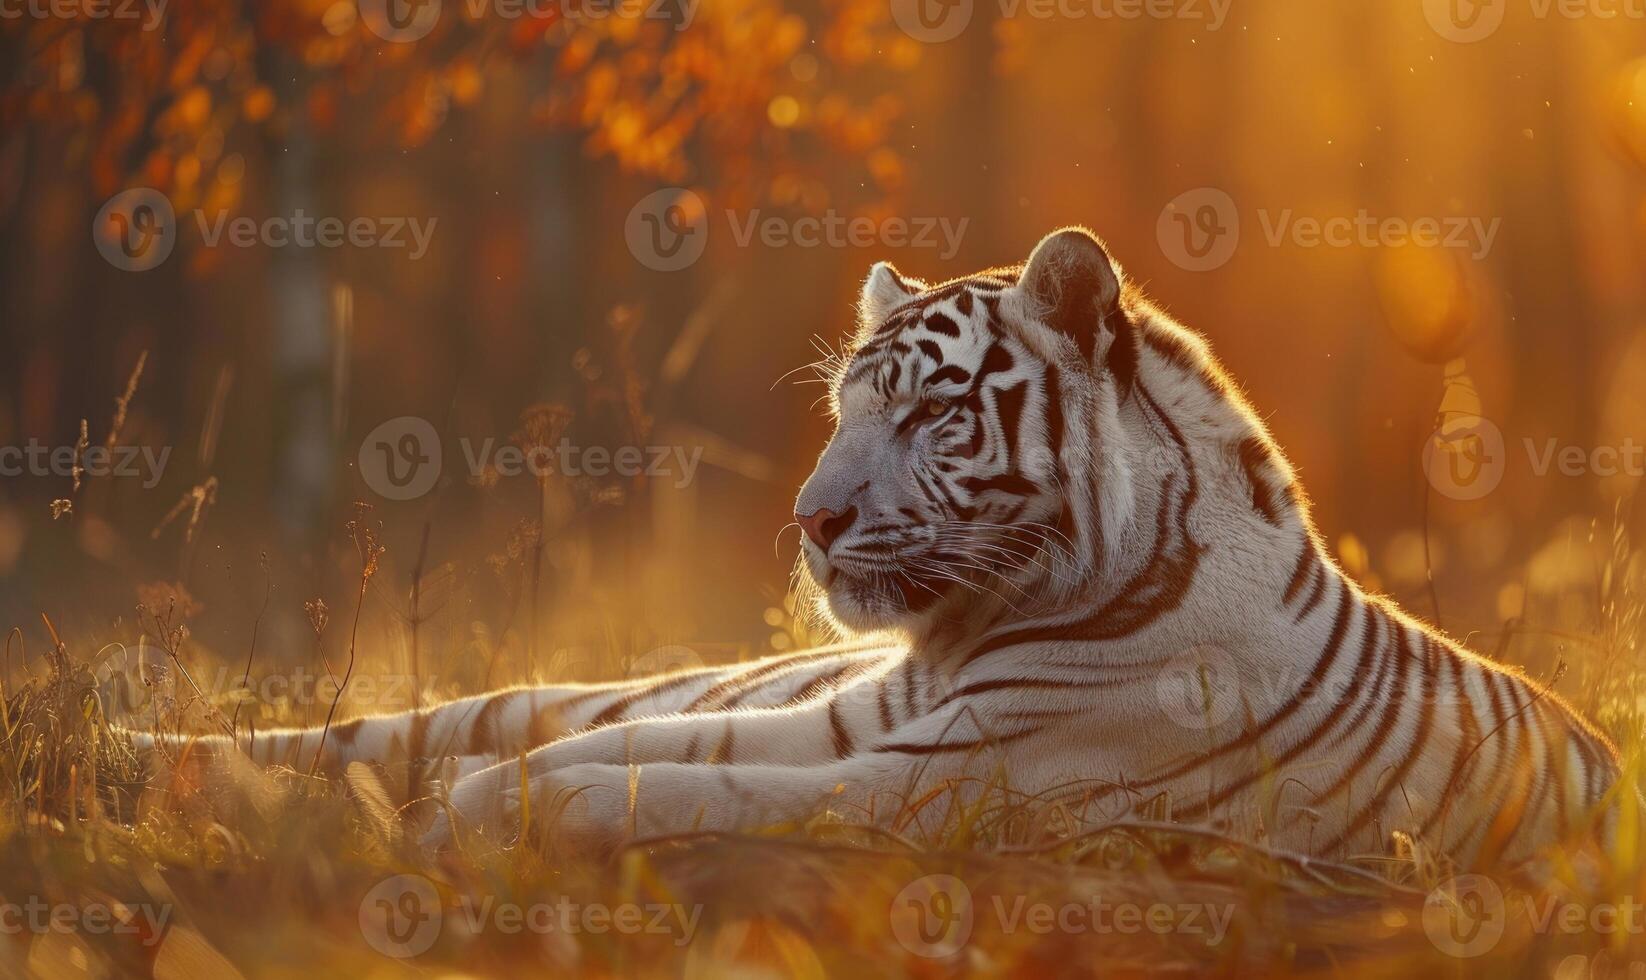 A white tiger basking in the warm glow of the setting sun photo